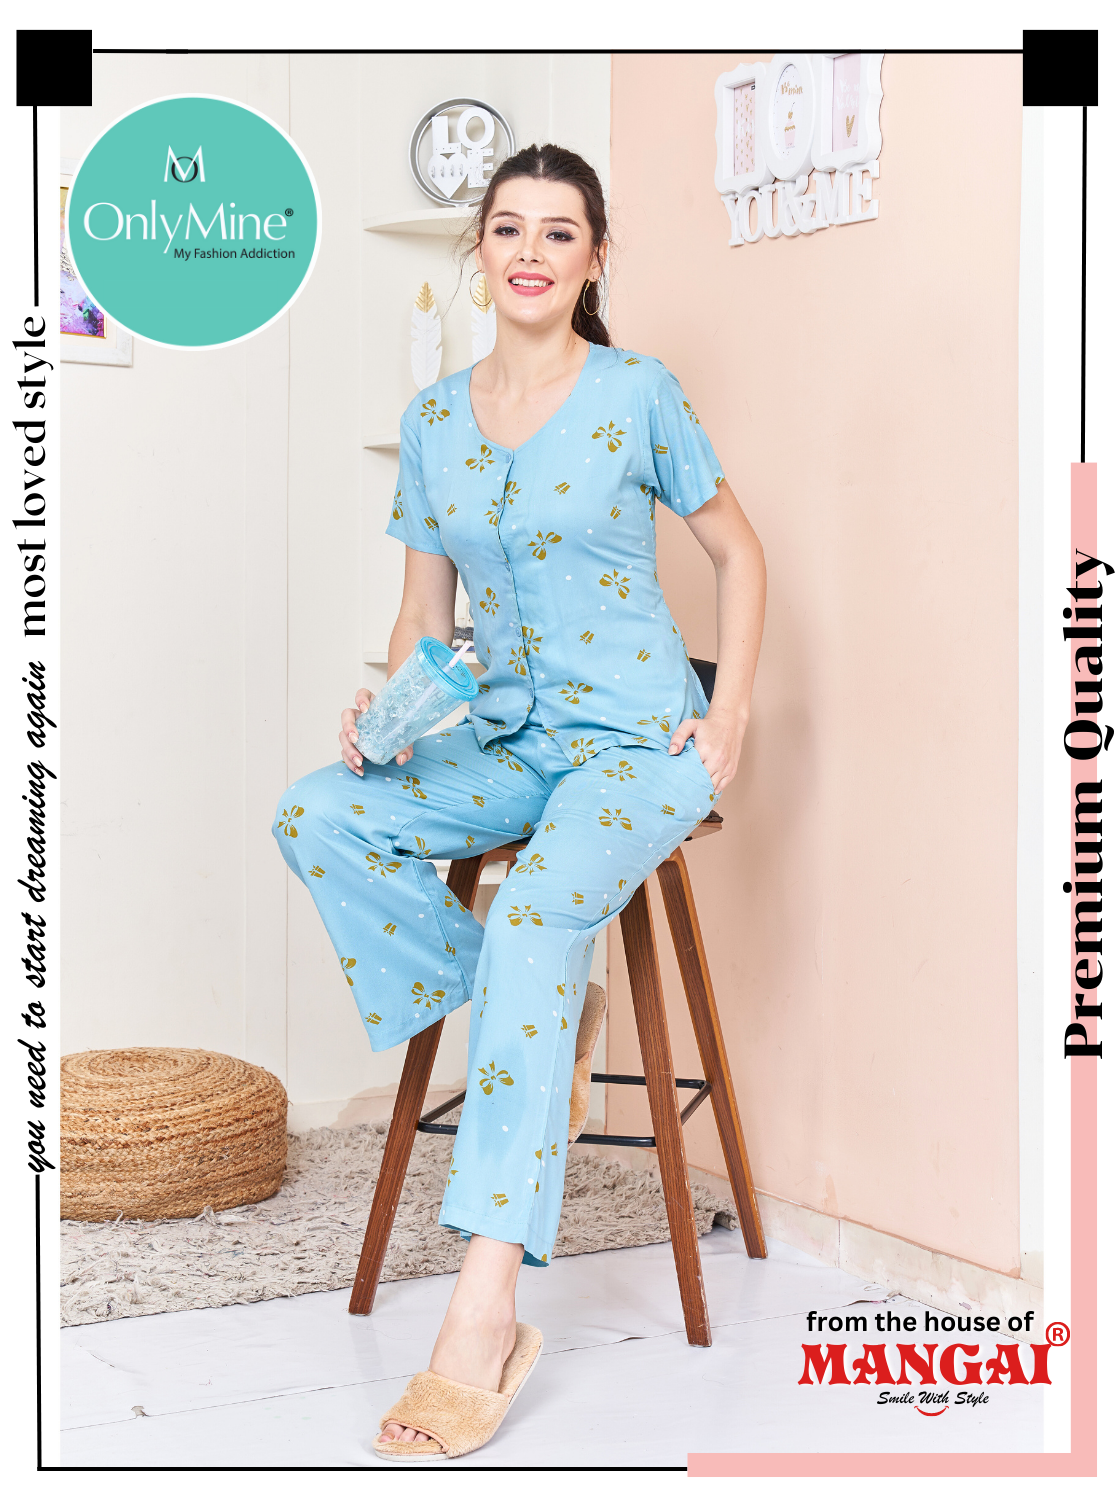 New Arrivals ONLY MINE Rayon Printed Top & Bottom Set Night Suits- Stylish Printed Top & Bottom Set for Trendy Women's